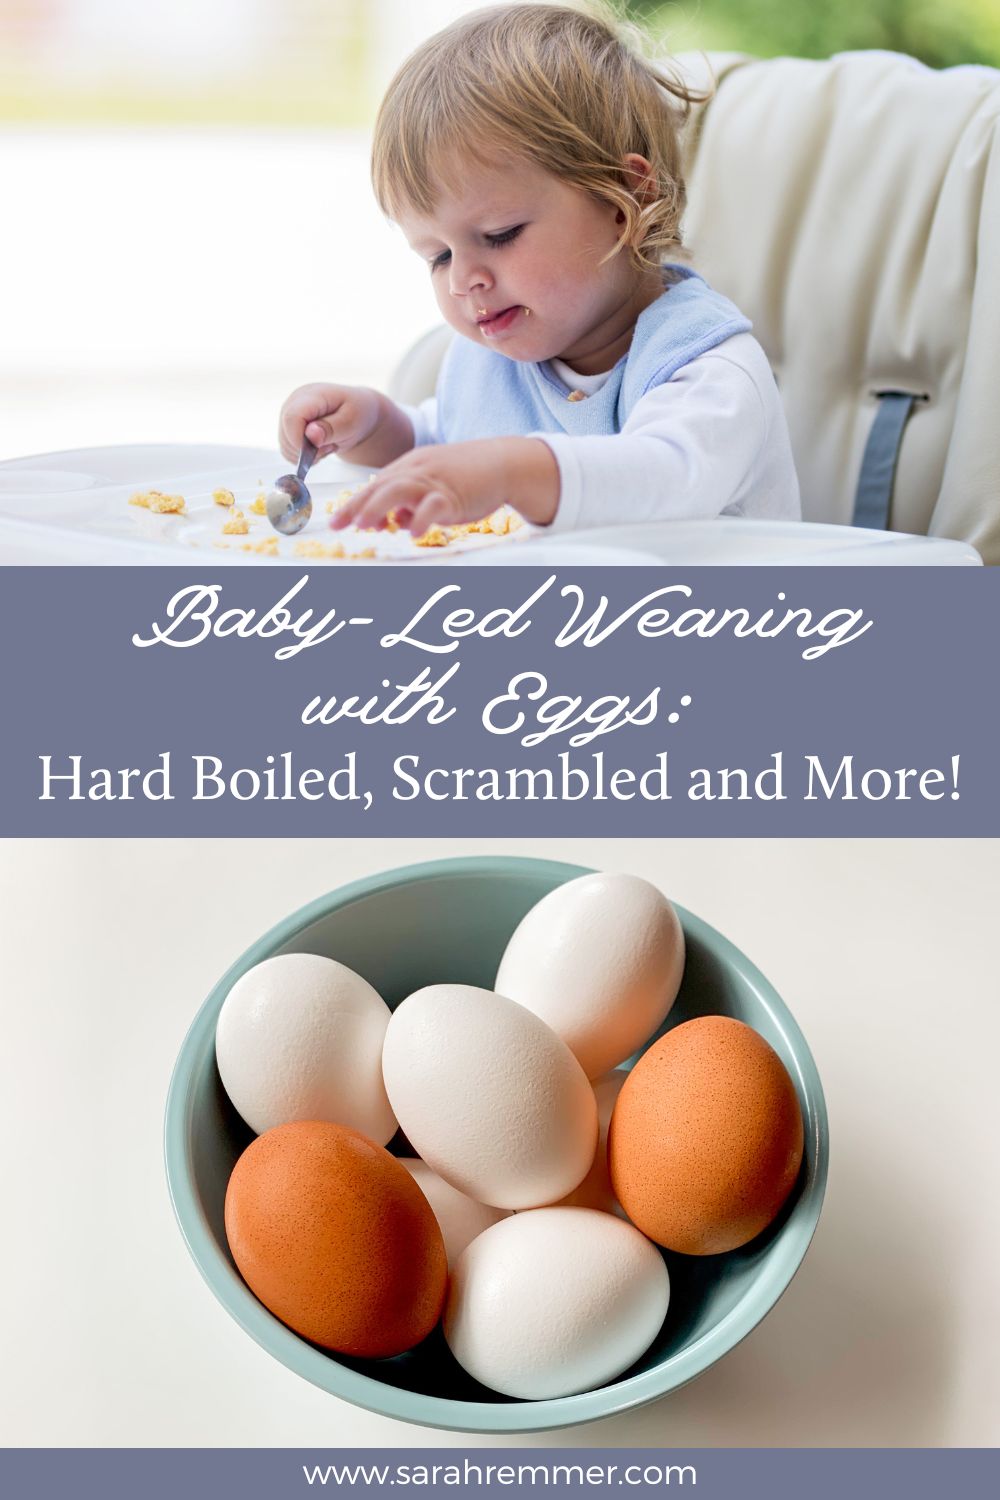 Here is everything you need to know about baby-led weaning with eggs, from a registered dietitian. Here's how to introduce eggs to your baby.